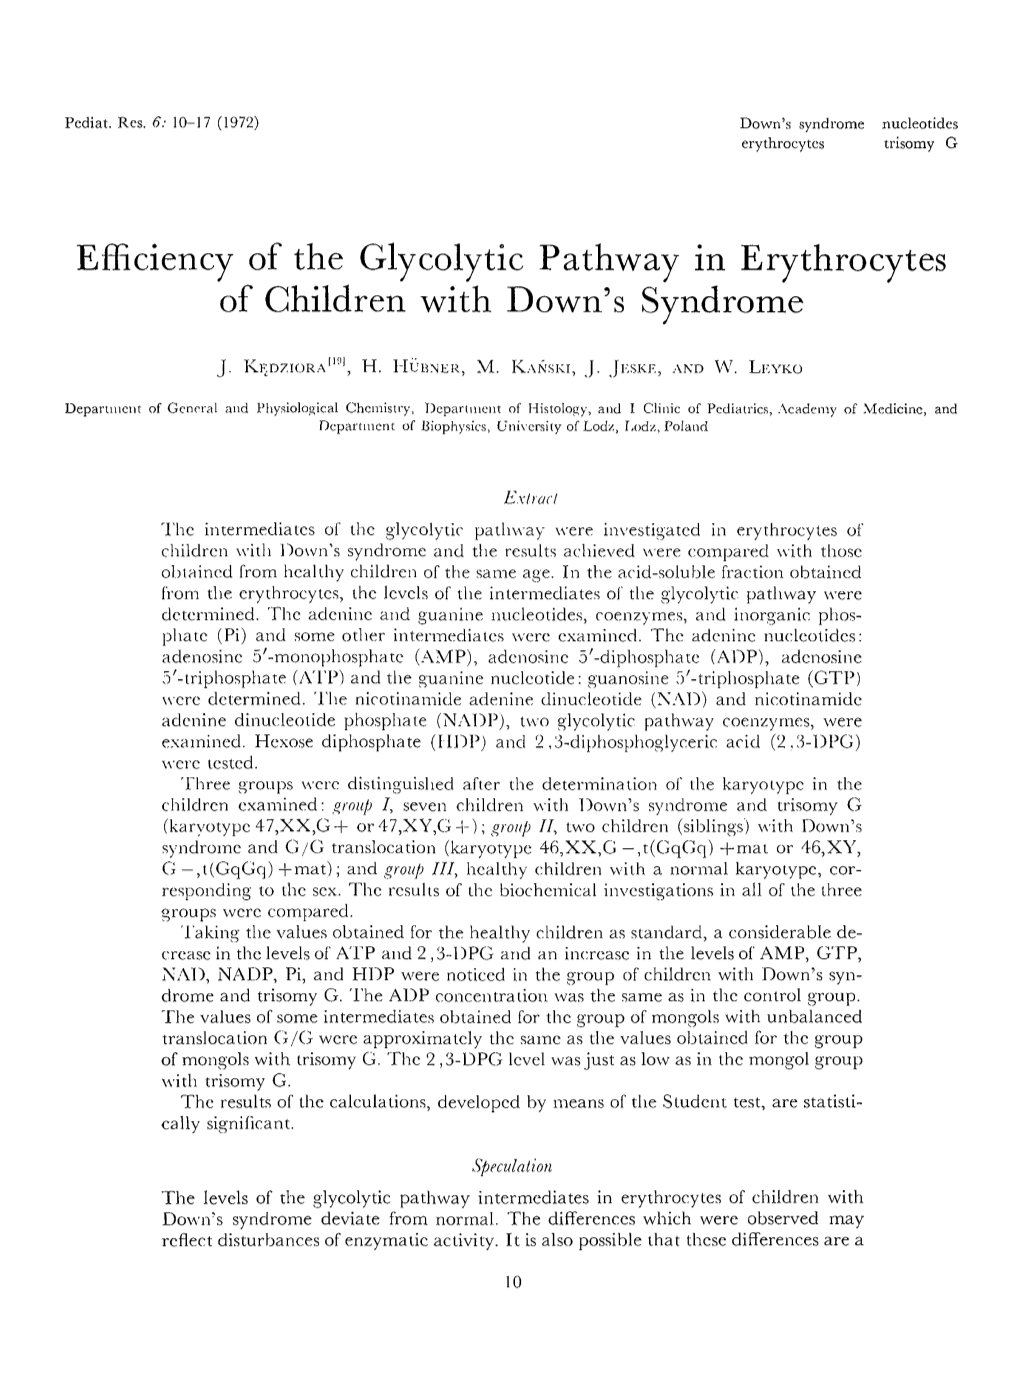 Efficiency of the Glycolytic Pathway in Erythrocytes of Children with Down's Syndrome